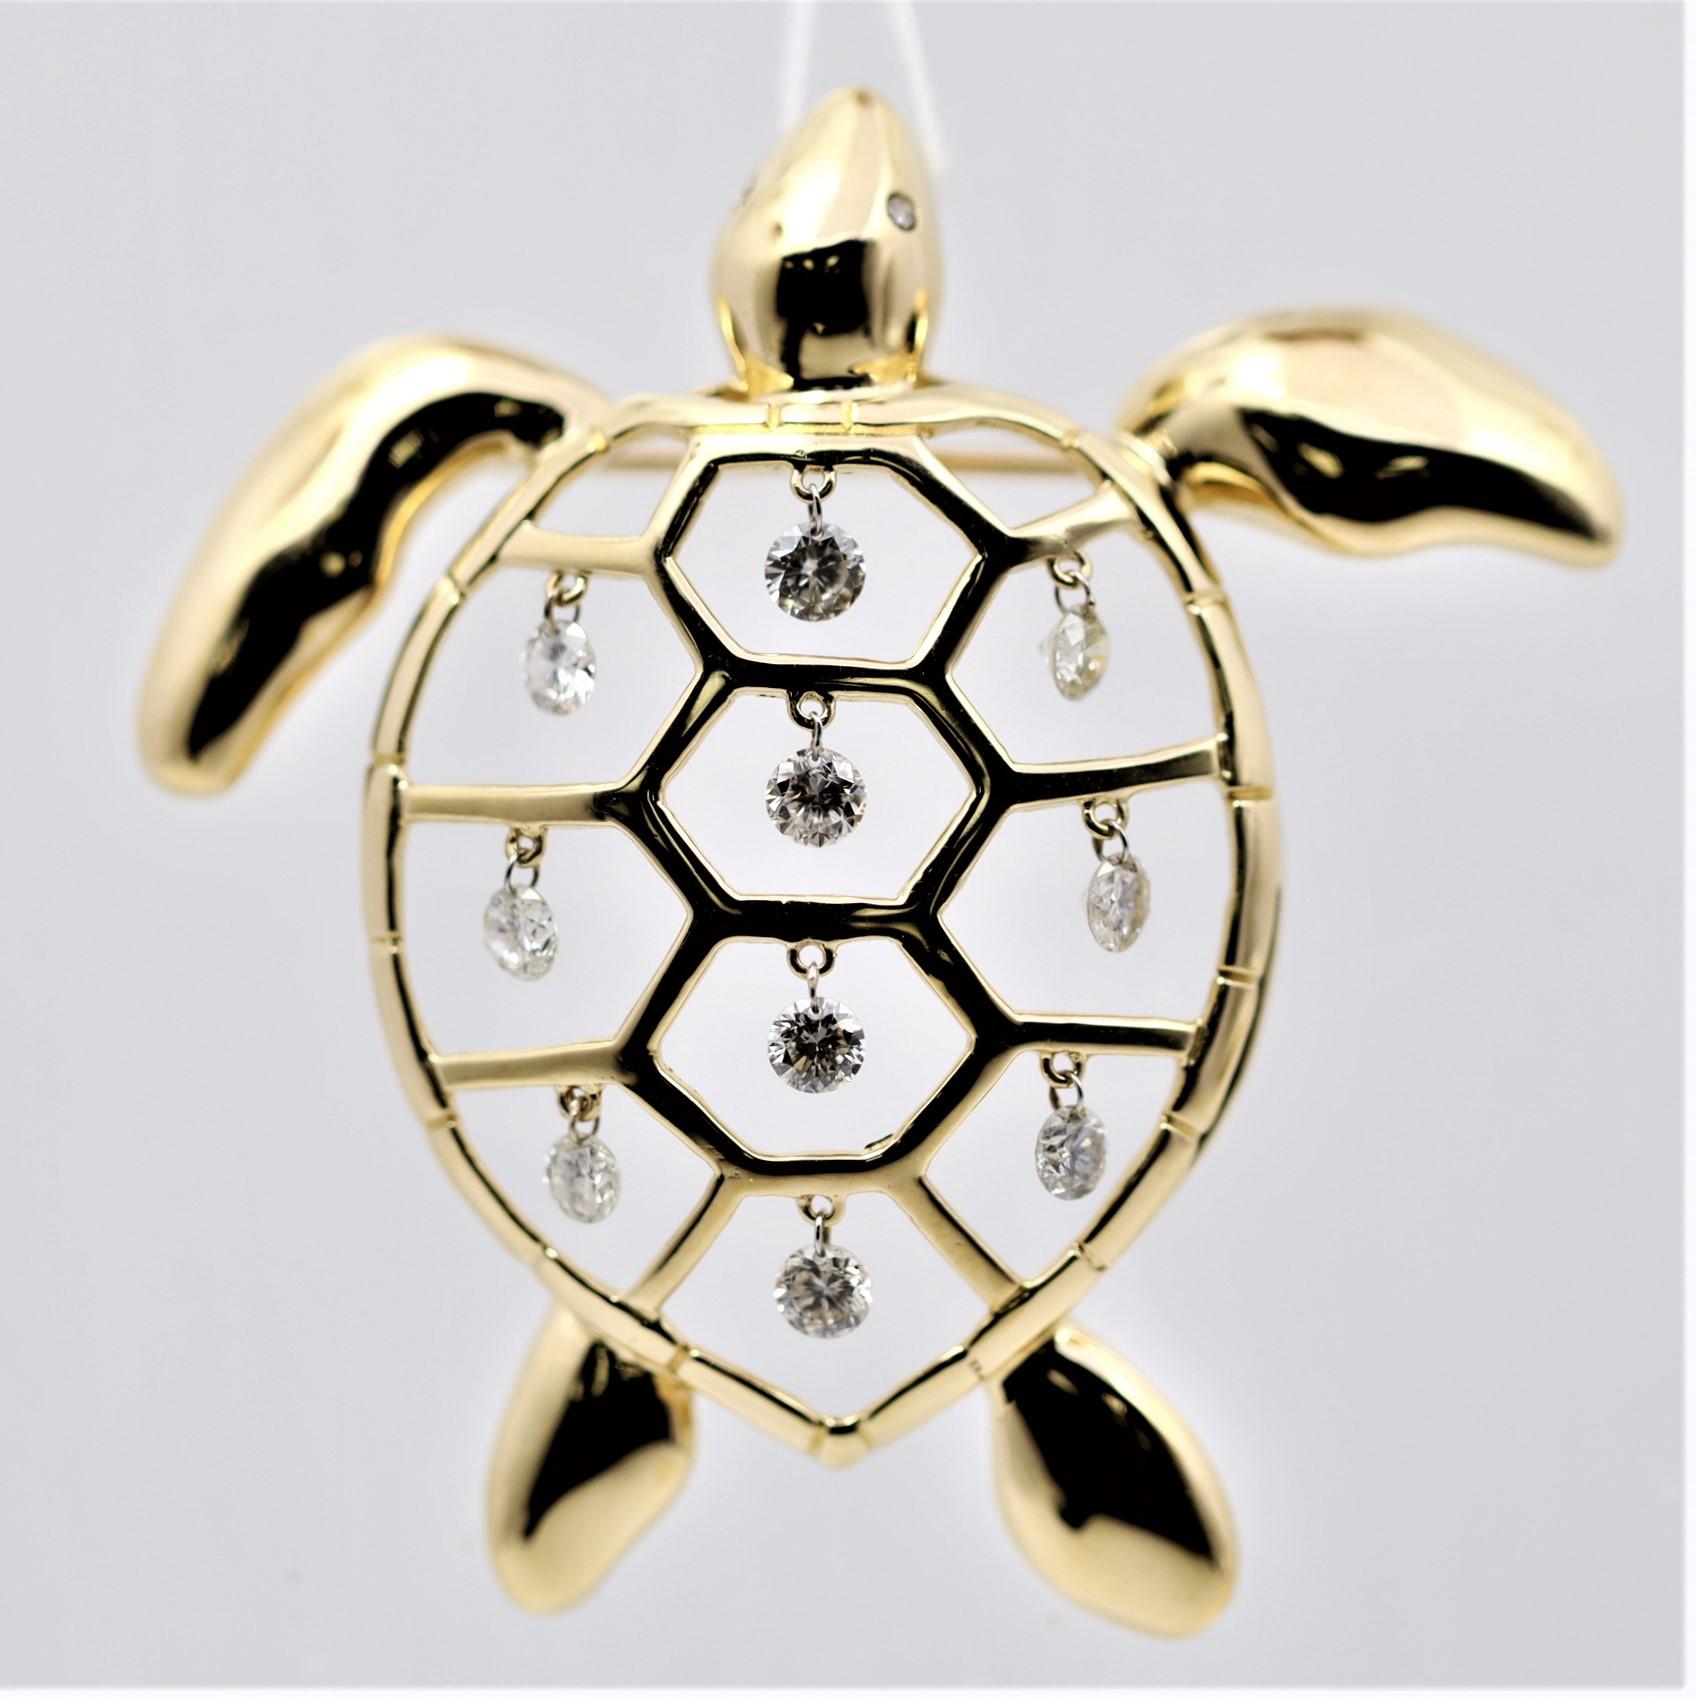 A fun and dazzling piece of a diamond studded turtle! The diamonds are wire-set across the turtle’s shell allowing each one to dangle and dance on their own and weigh a total of 0.90 carats. The turtle is made in 18k yellow gold and is ready to be